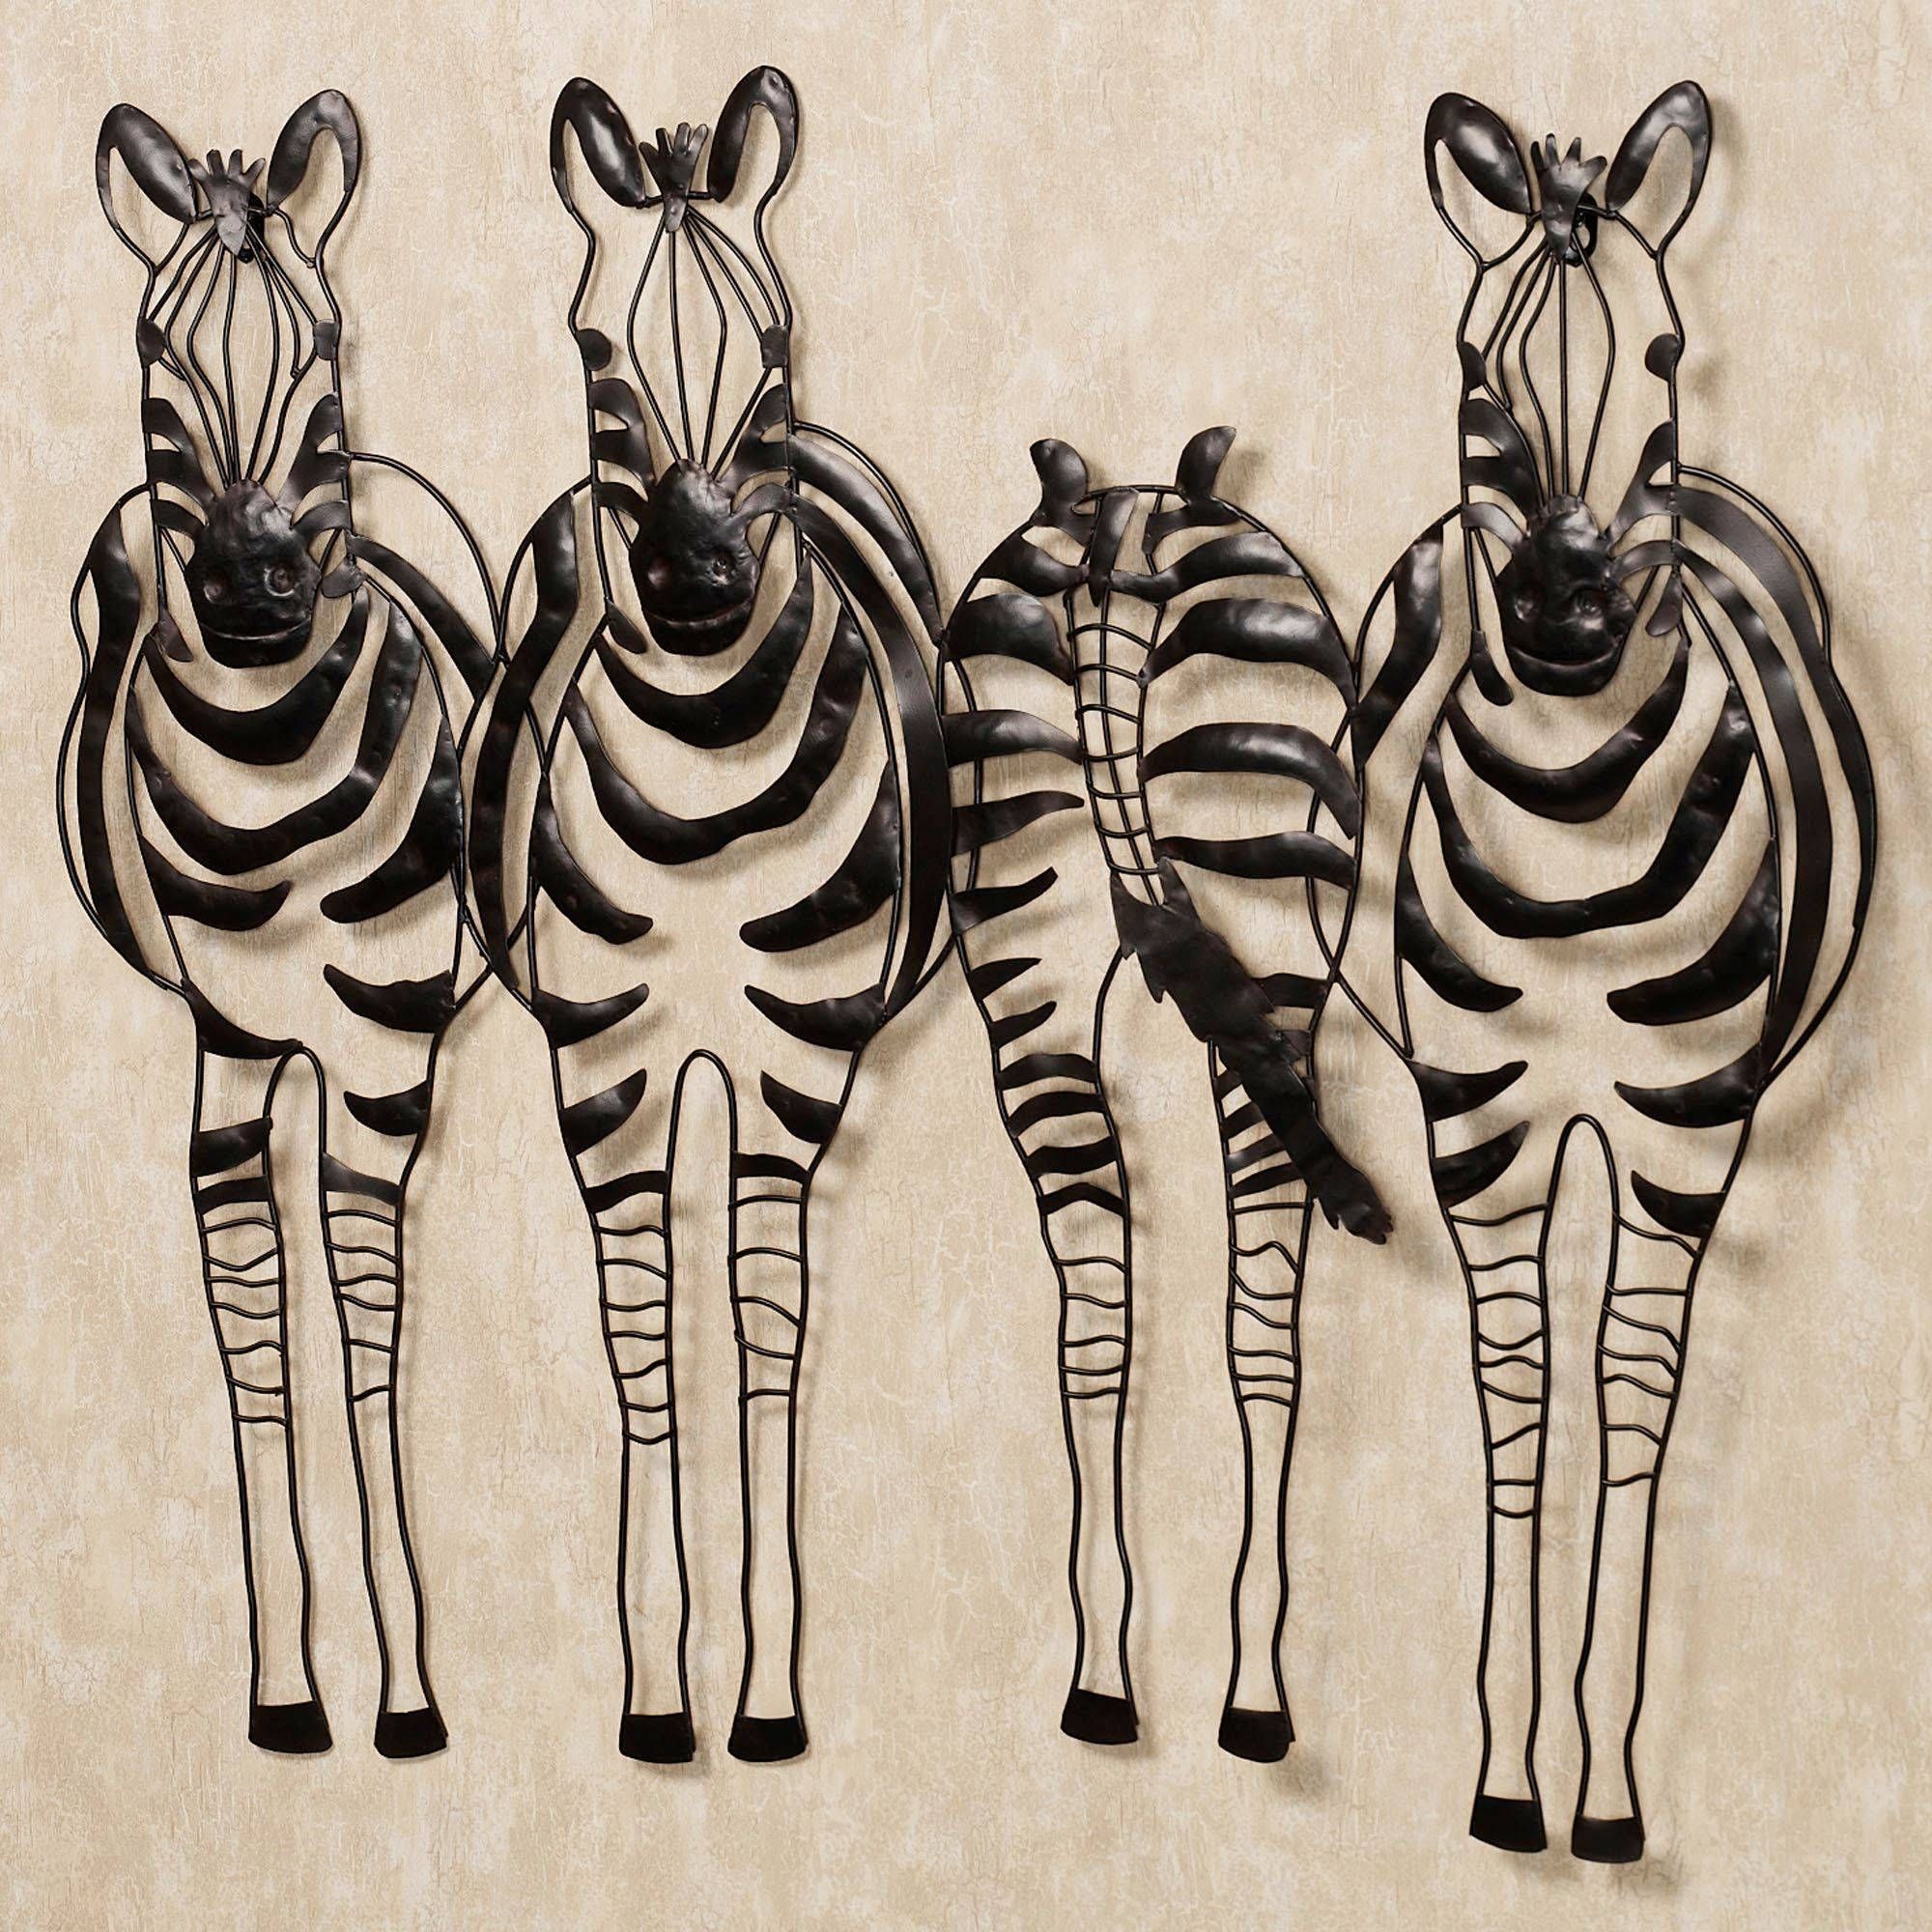 Animal Metal Wall Sculptures | Touch Of Class In Most Recent Metal animal Wall Art (View 1 of 20)